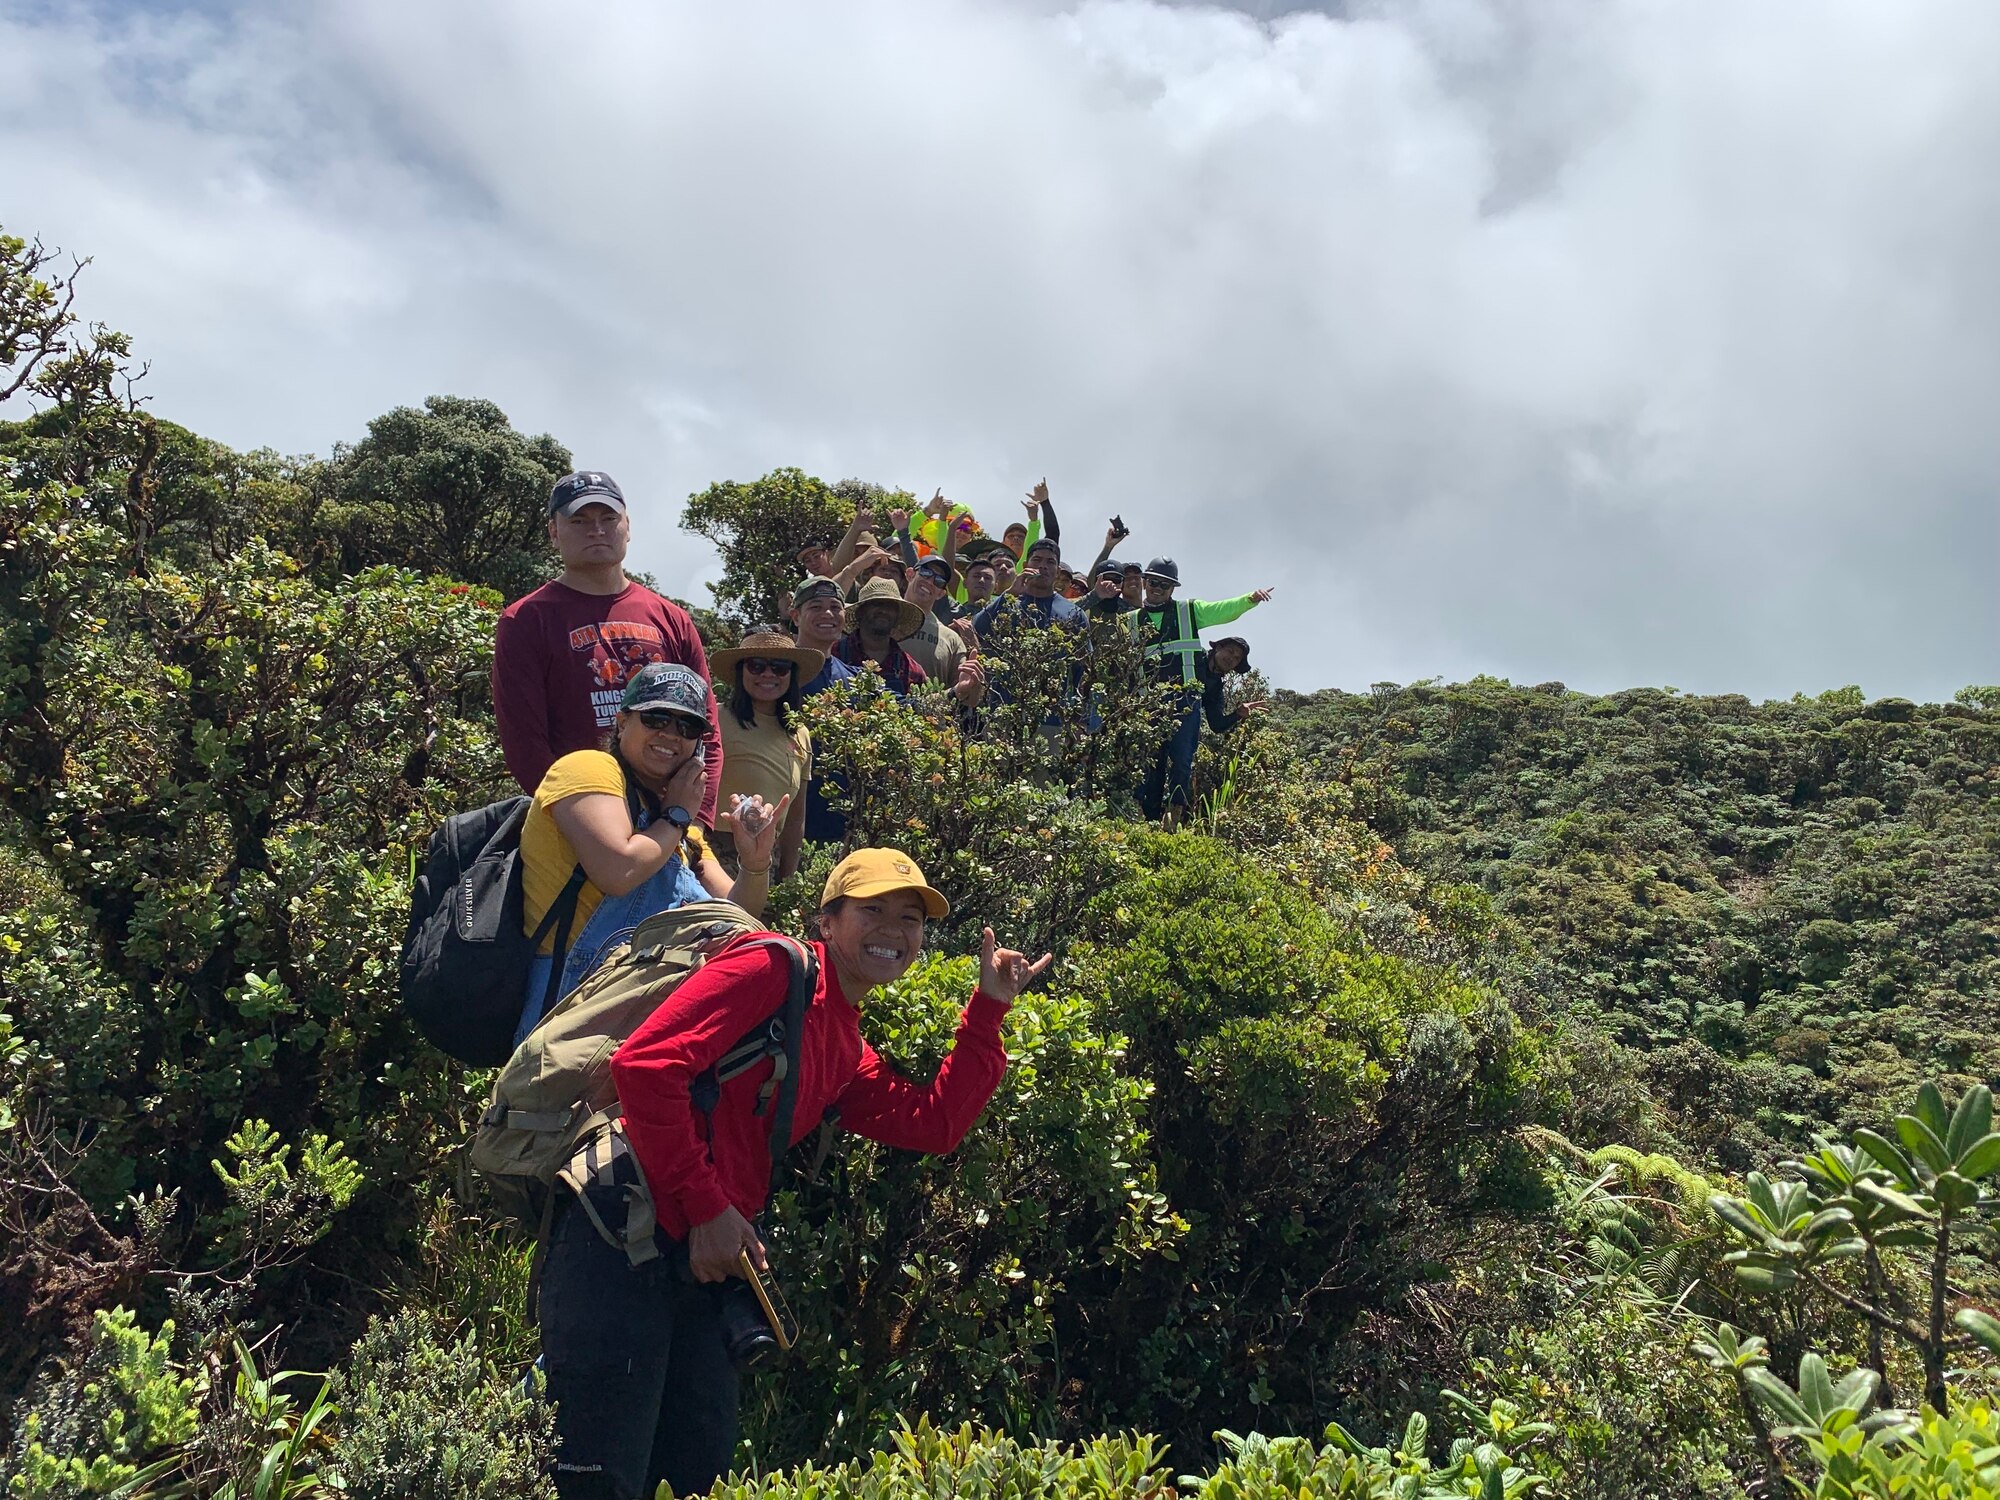 Airman 1st Class Genesaret Balladares,154th Security Forces Squadron member, leads a team of volunteers during a conservation event June 8, 2021, on Mount Kaala, Hawaii